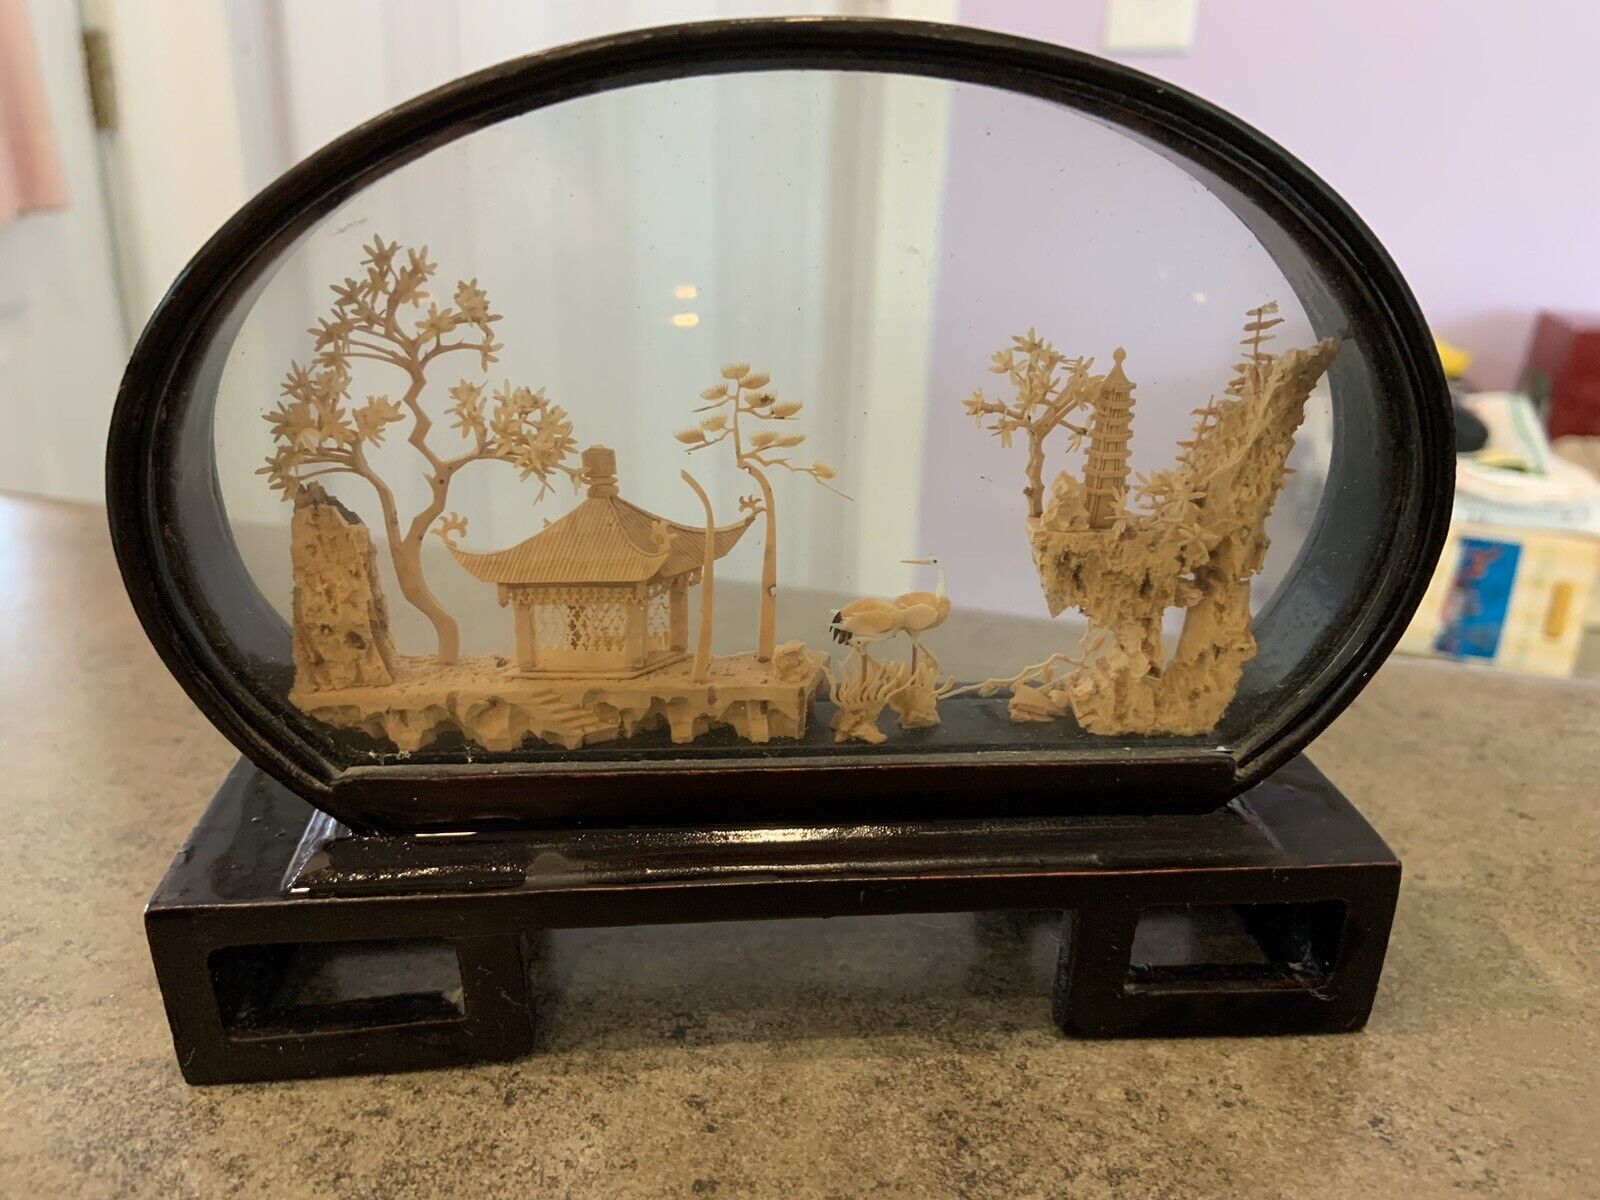 VINTAGE CHINESE SAN YOU DIORAMA CORK CARVING GLASS CASE PAGODA TREES & CRANES.